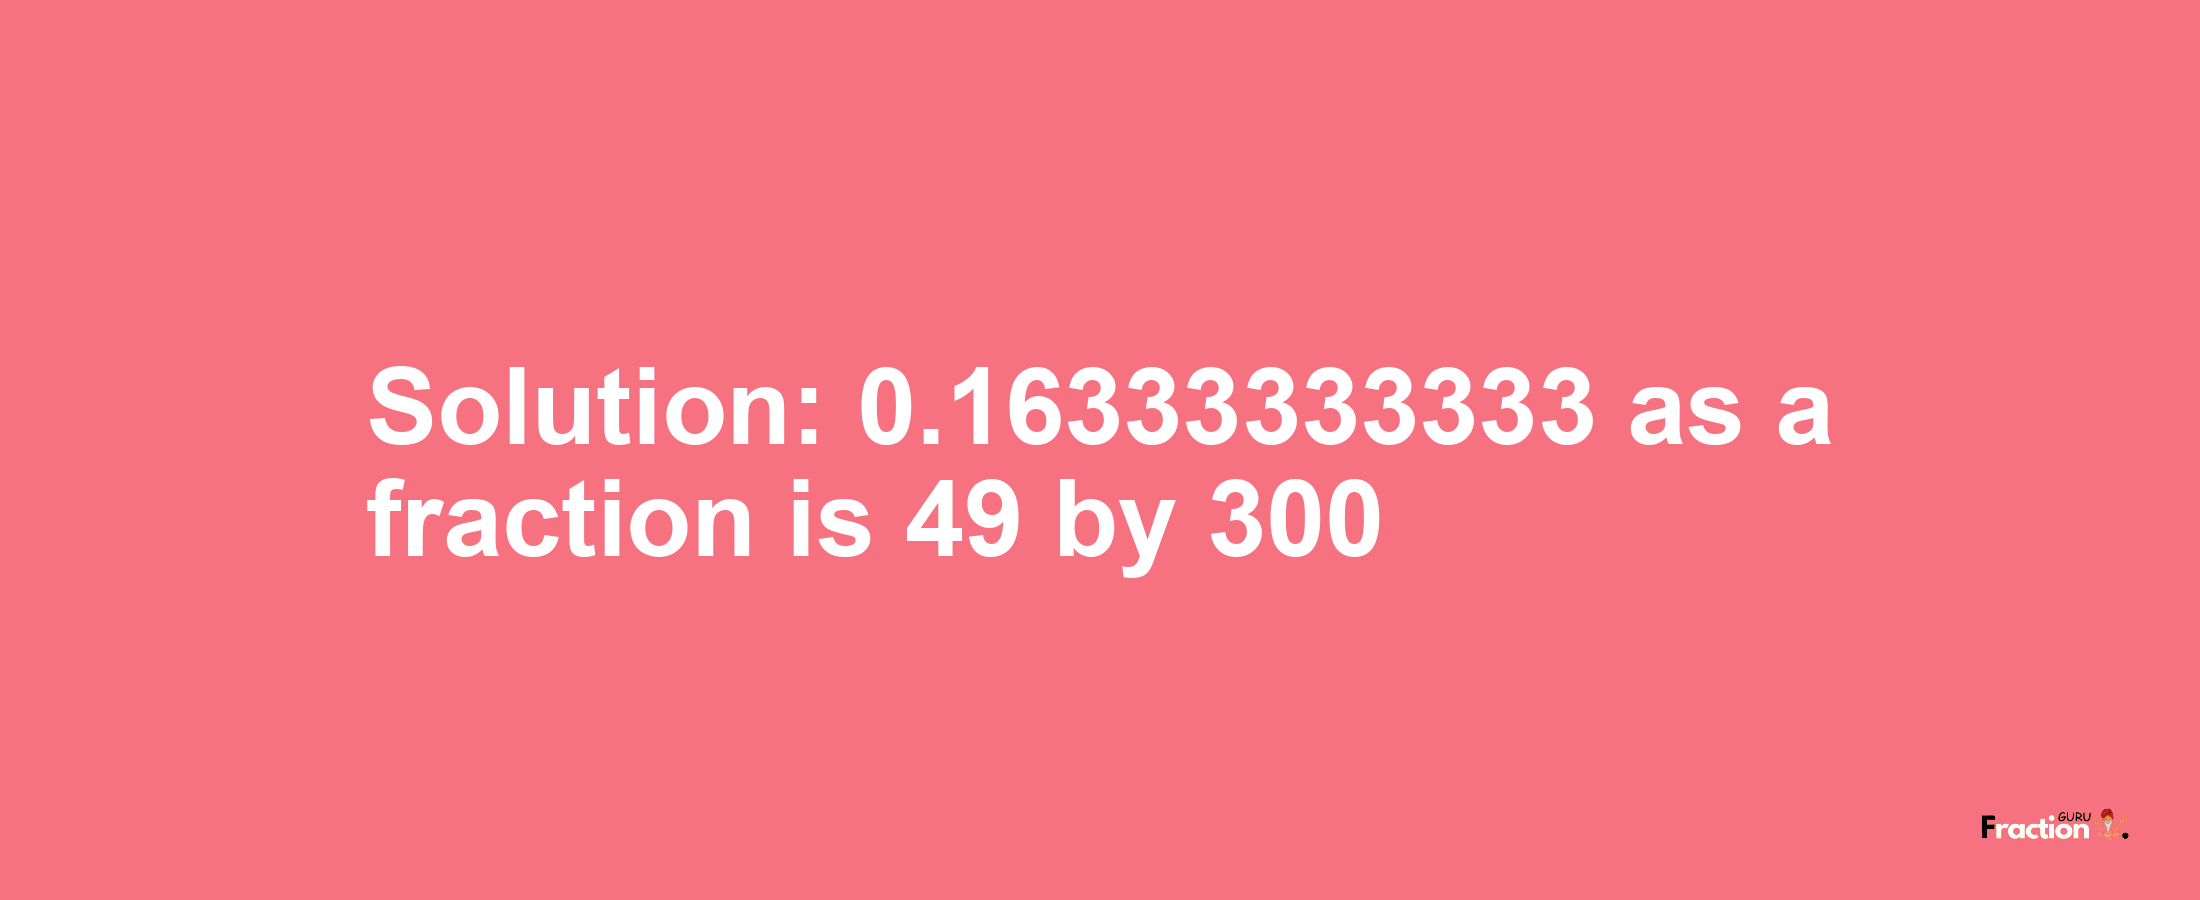 Solution:0.16333333333 as a fraction is 49/300